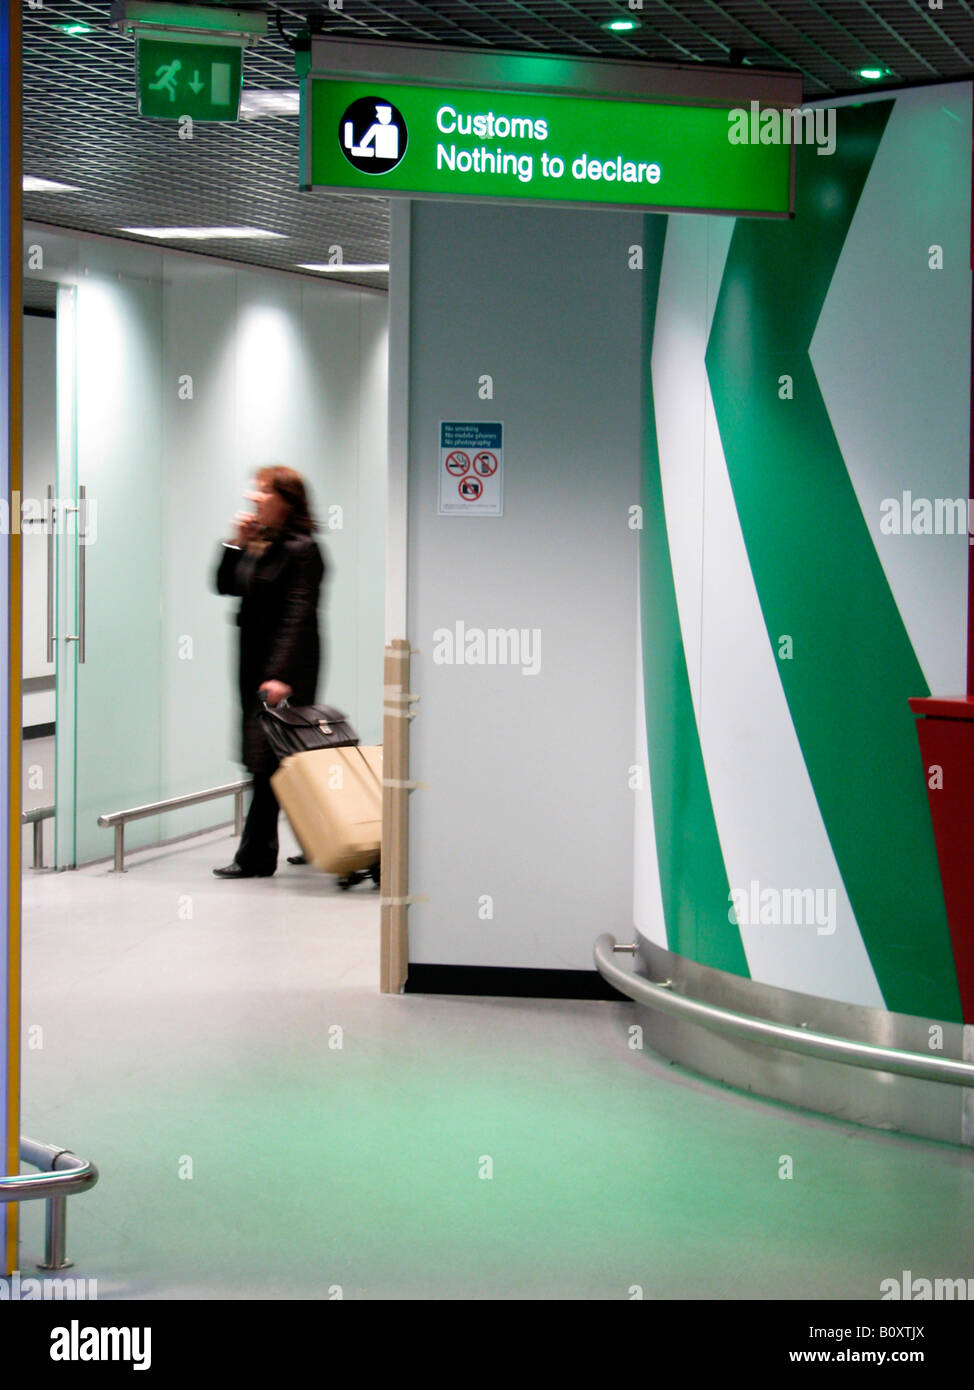 Female traveller passing an illuminated sign at the airport showing a symbol of the customs -  'Nothing to declare', United Kin Stock Photo